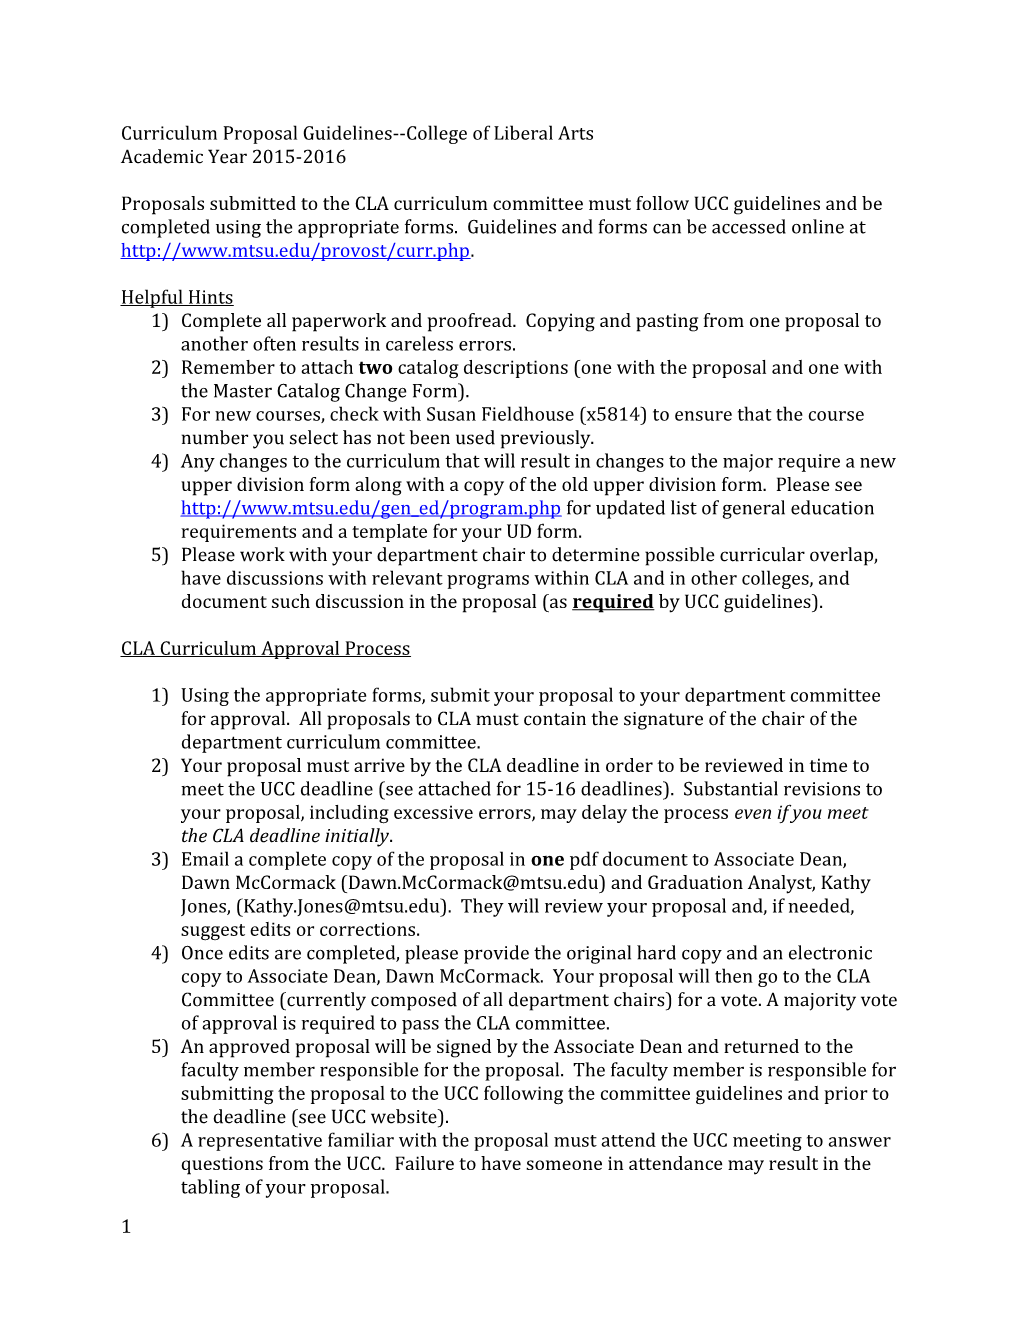 Curriculum Proposal Guidelines College of Liberal Arts